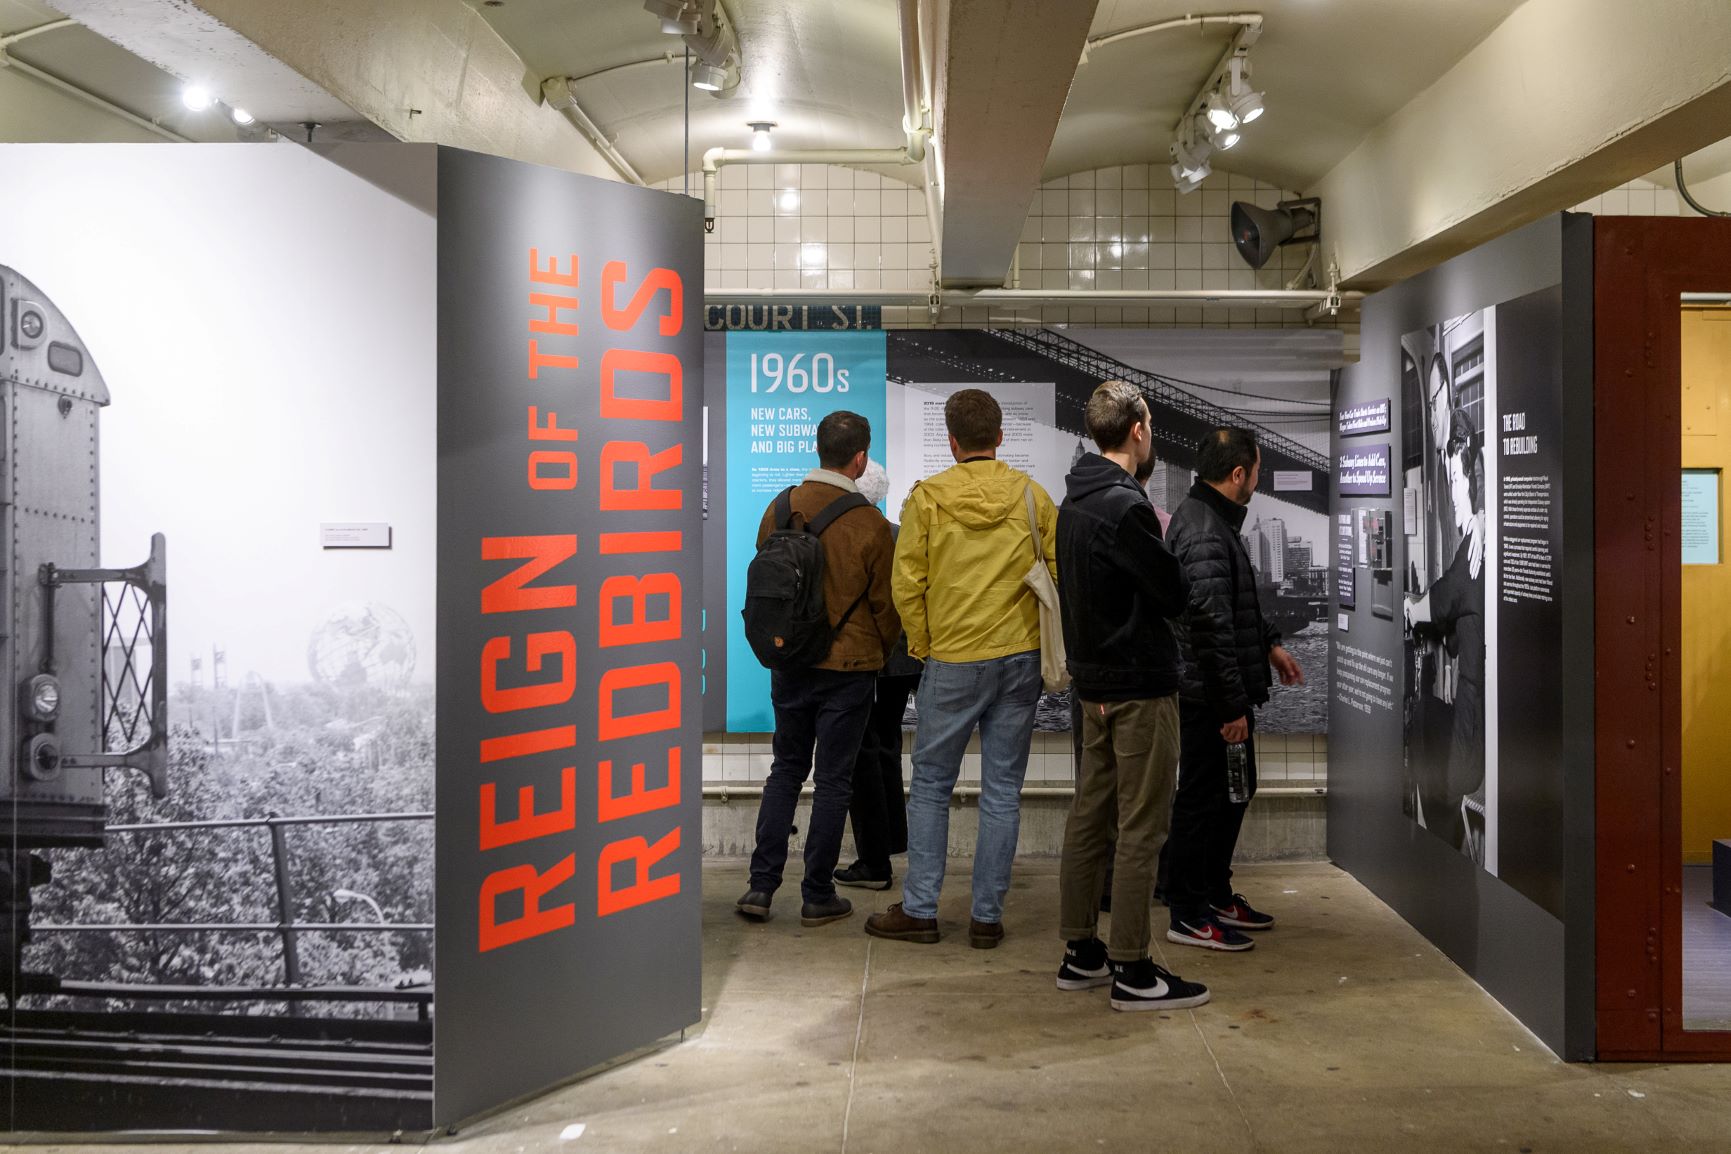 Reign of the Redbirds Exhibit Photo with Visitors, Photo by Filip Wolak